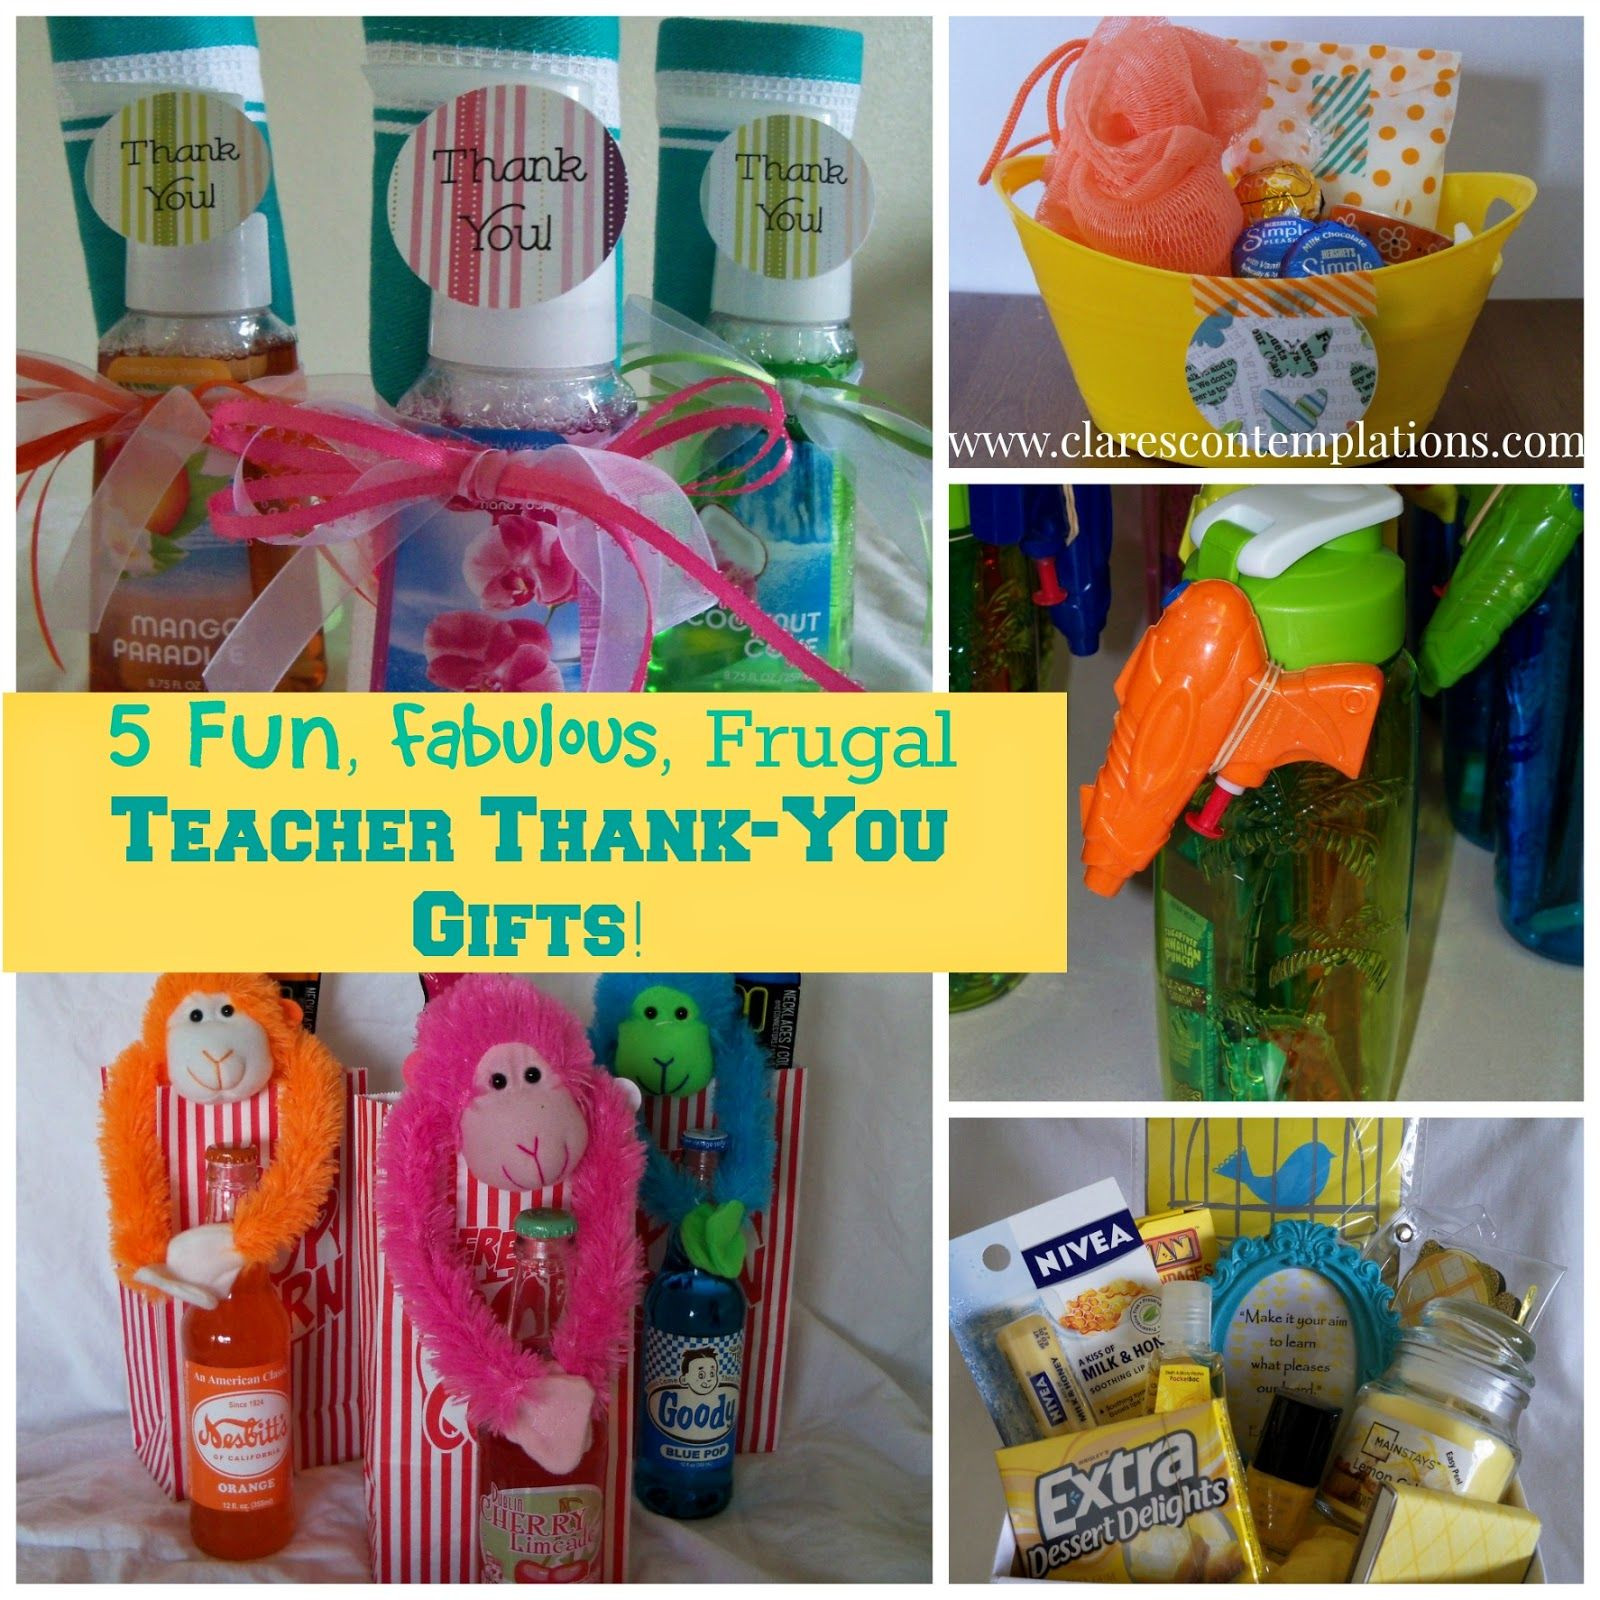 Thoughtful Thank You Gift Ideas
 5 Fun Fabulous and Frugal Teacher Thank You Gifts no one